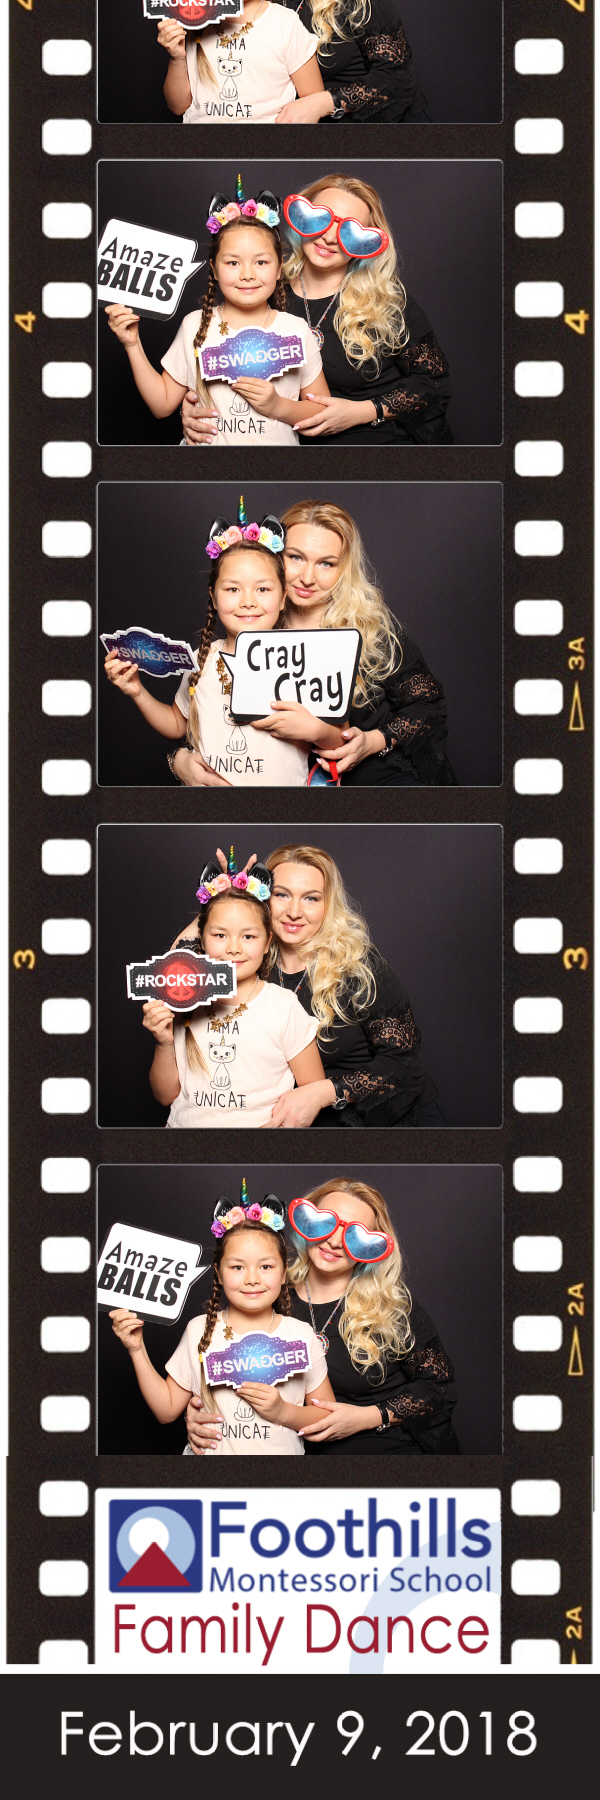 2x6 photo strip of woman and young girl with props posing with black backdrop